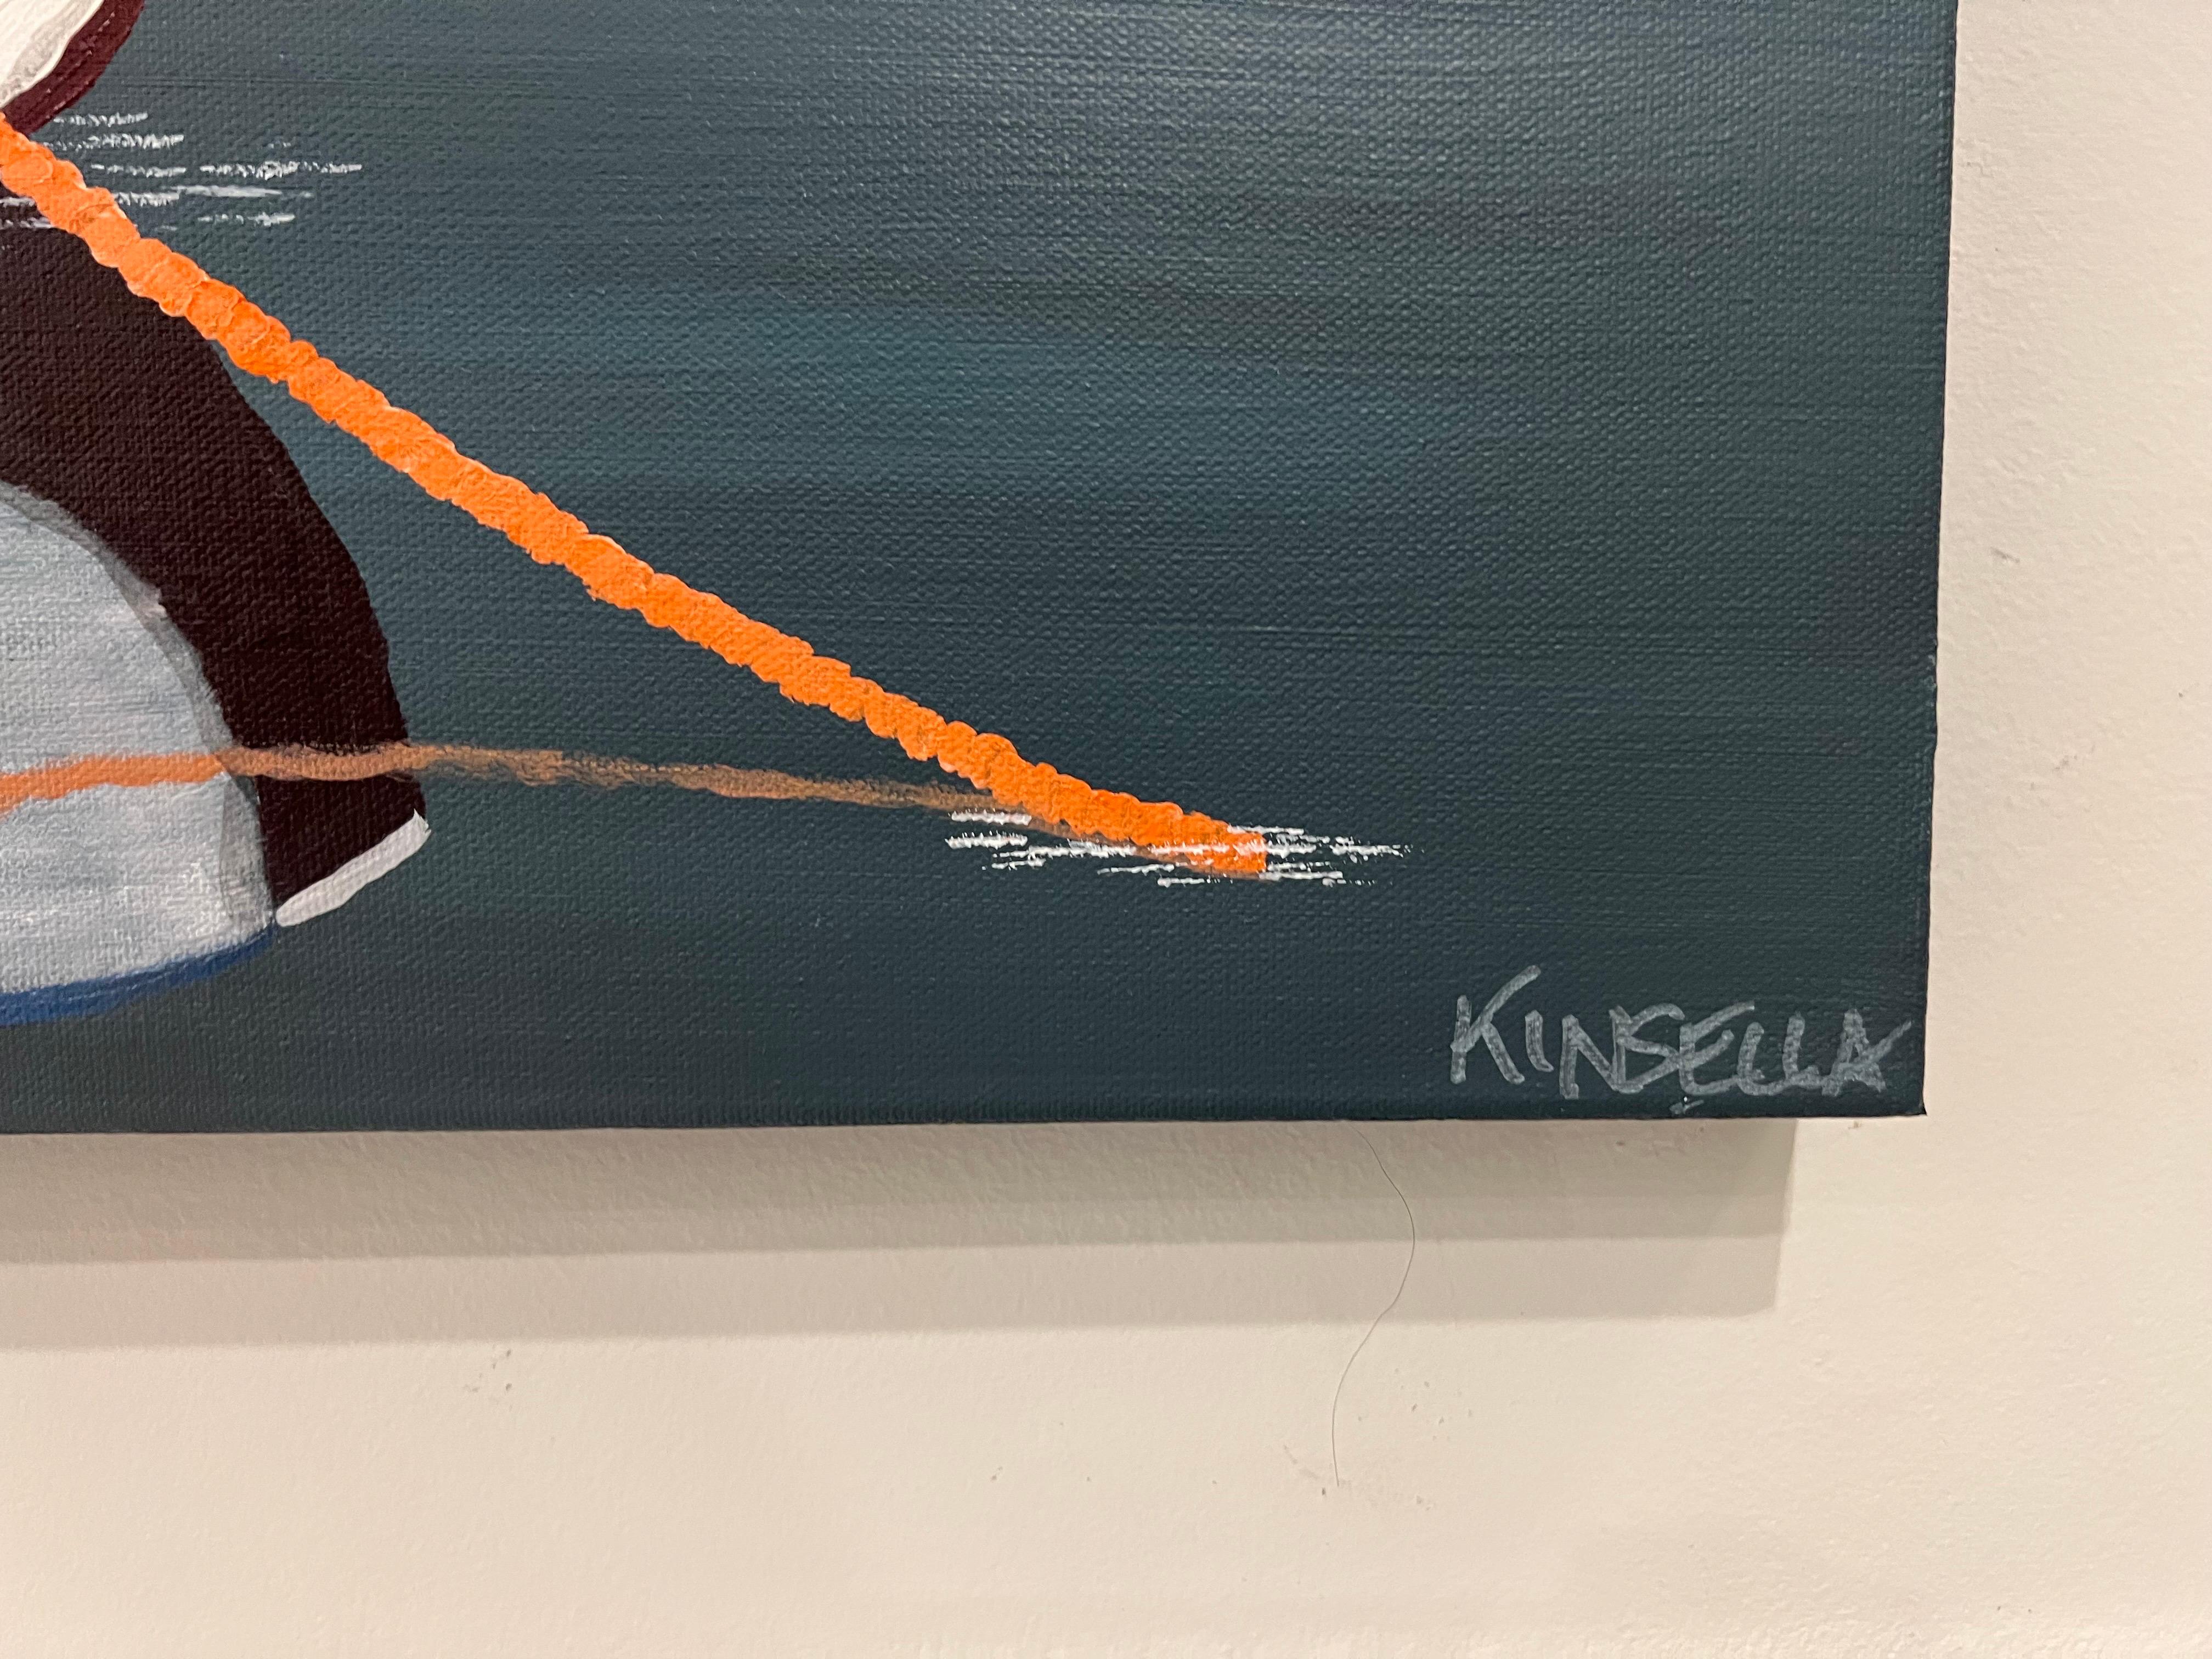 Still Waters by Susan Kinsella, Boat with Orange Acrylic on Canvas Painting 1